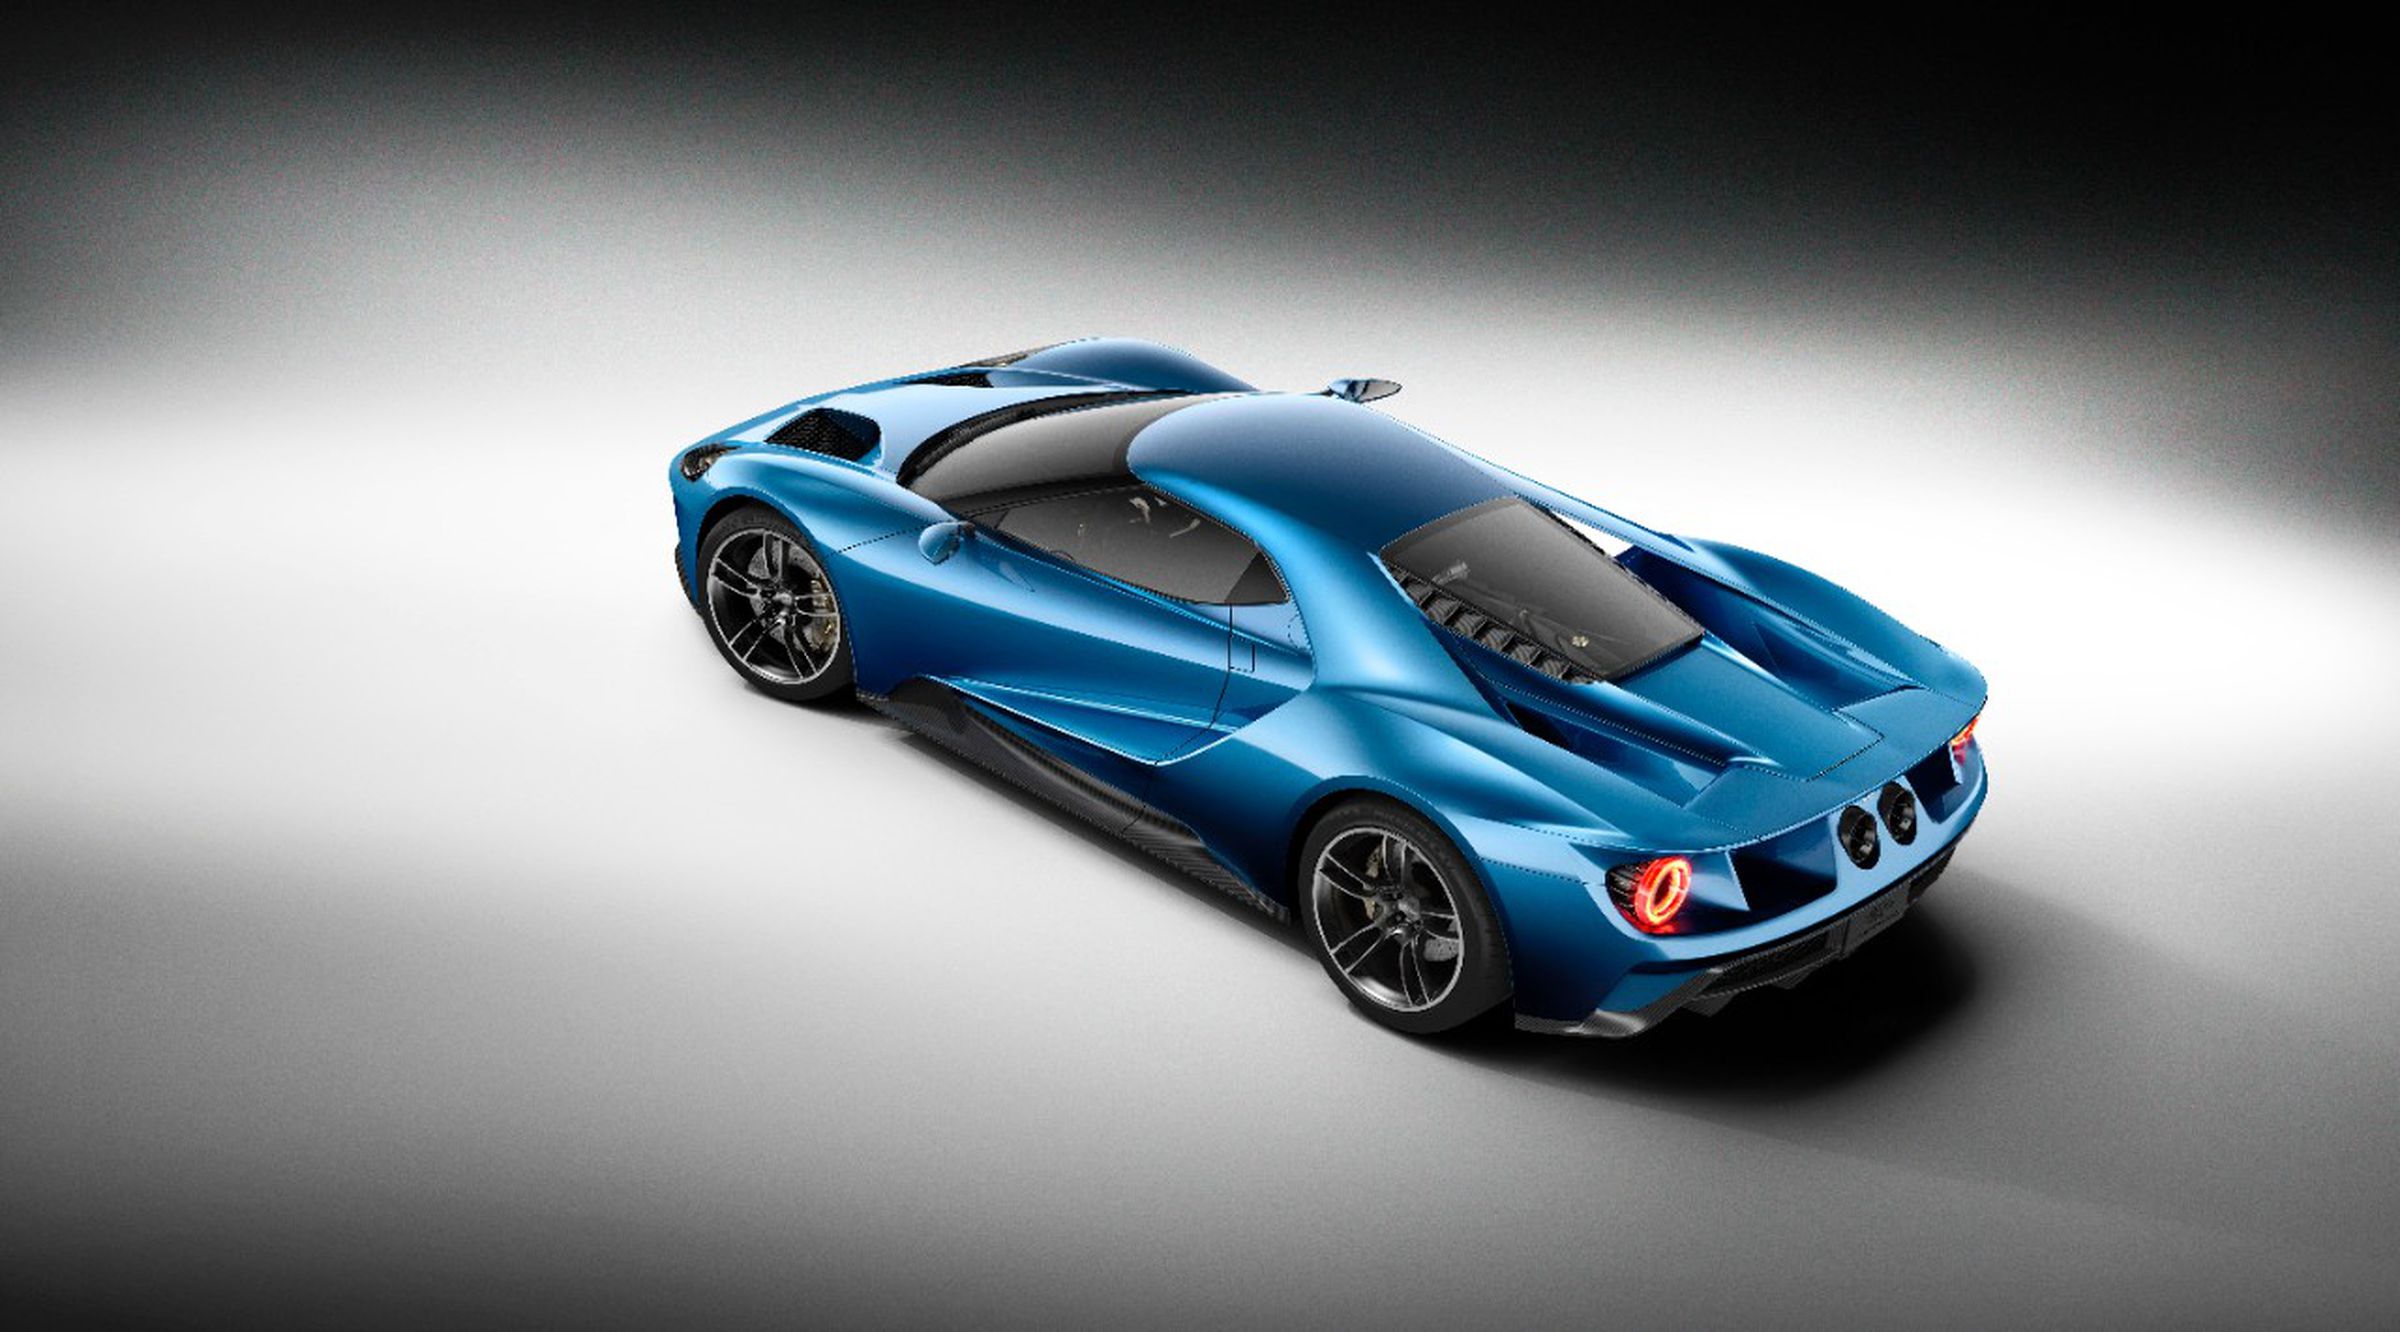 New 2016 Ford GT in photos